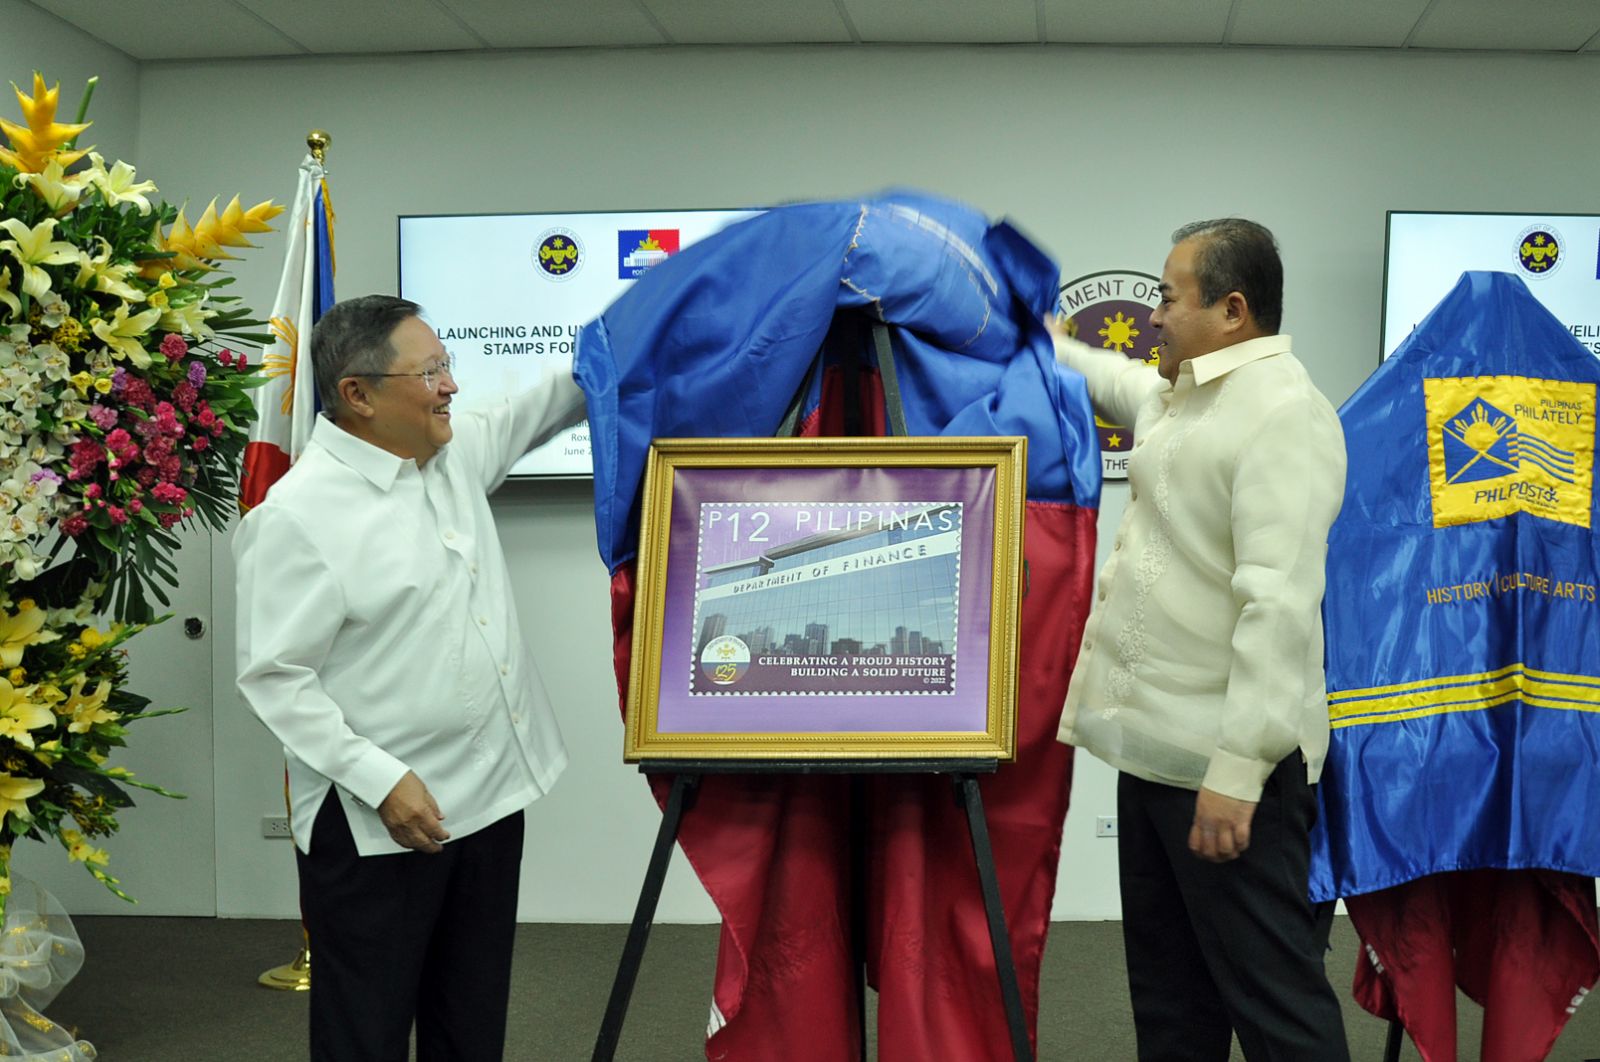 PH Post Office released new stamps to celebrate Department of Finance 125th Anniversary